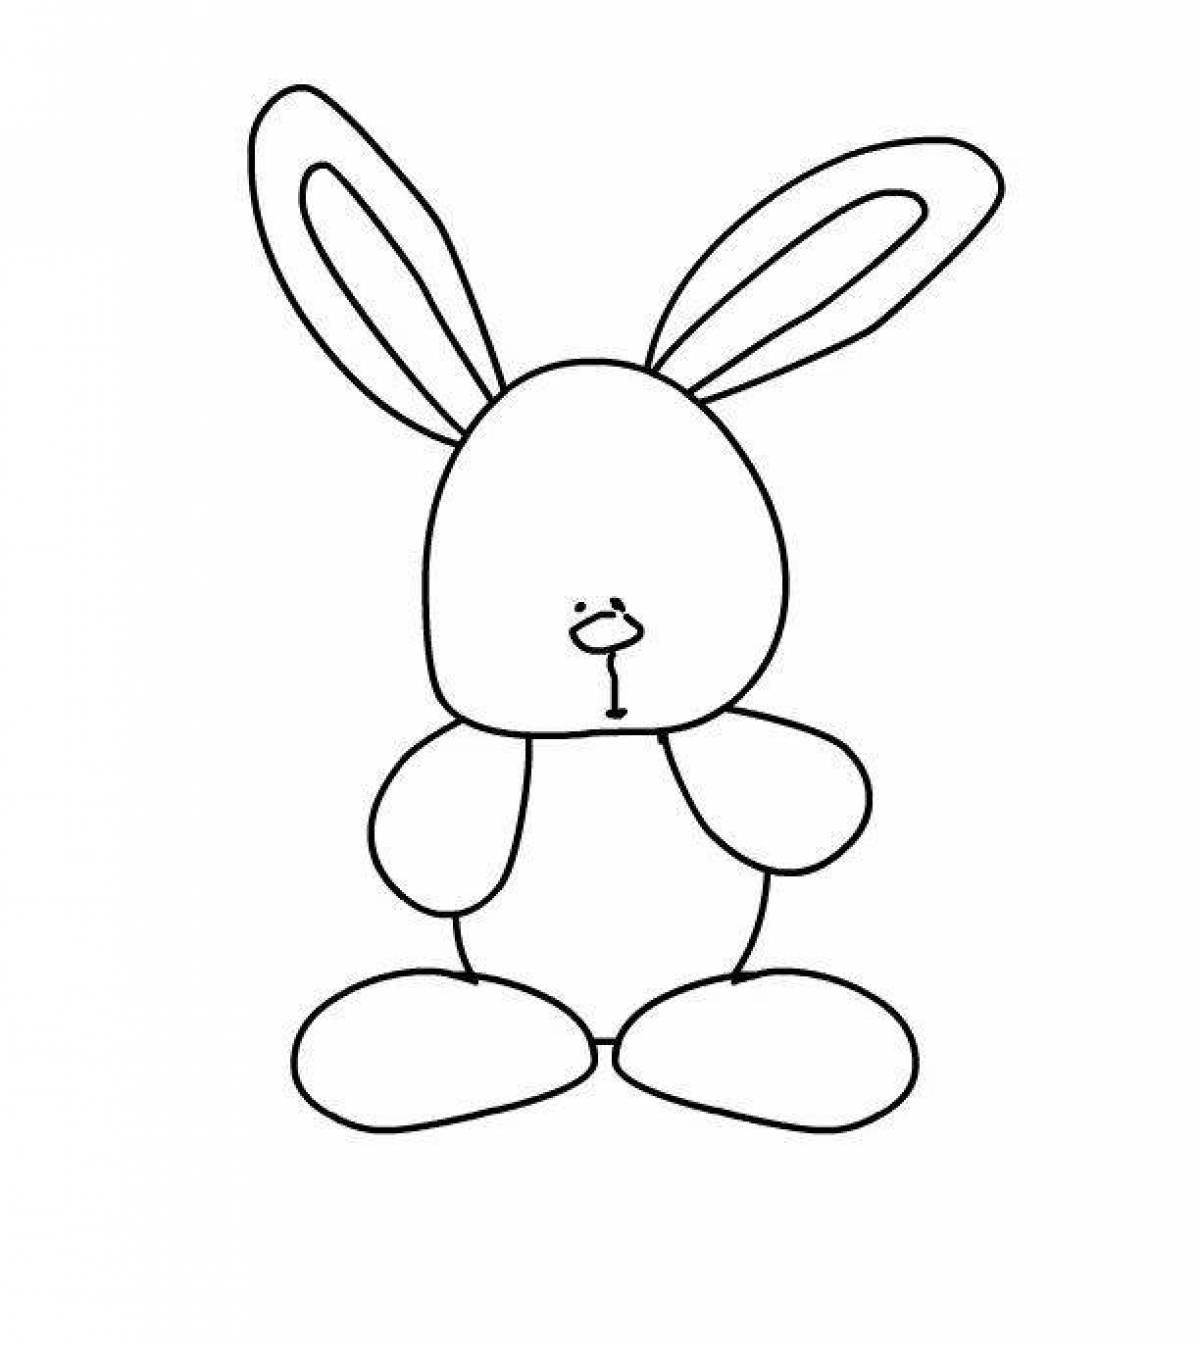 Coloring book wonderful hare